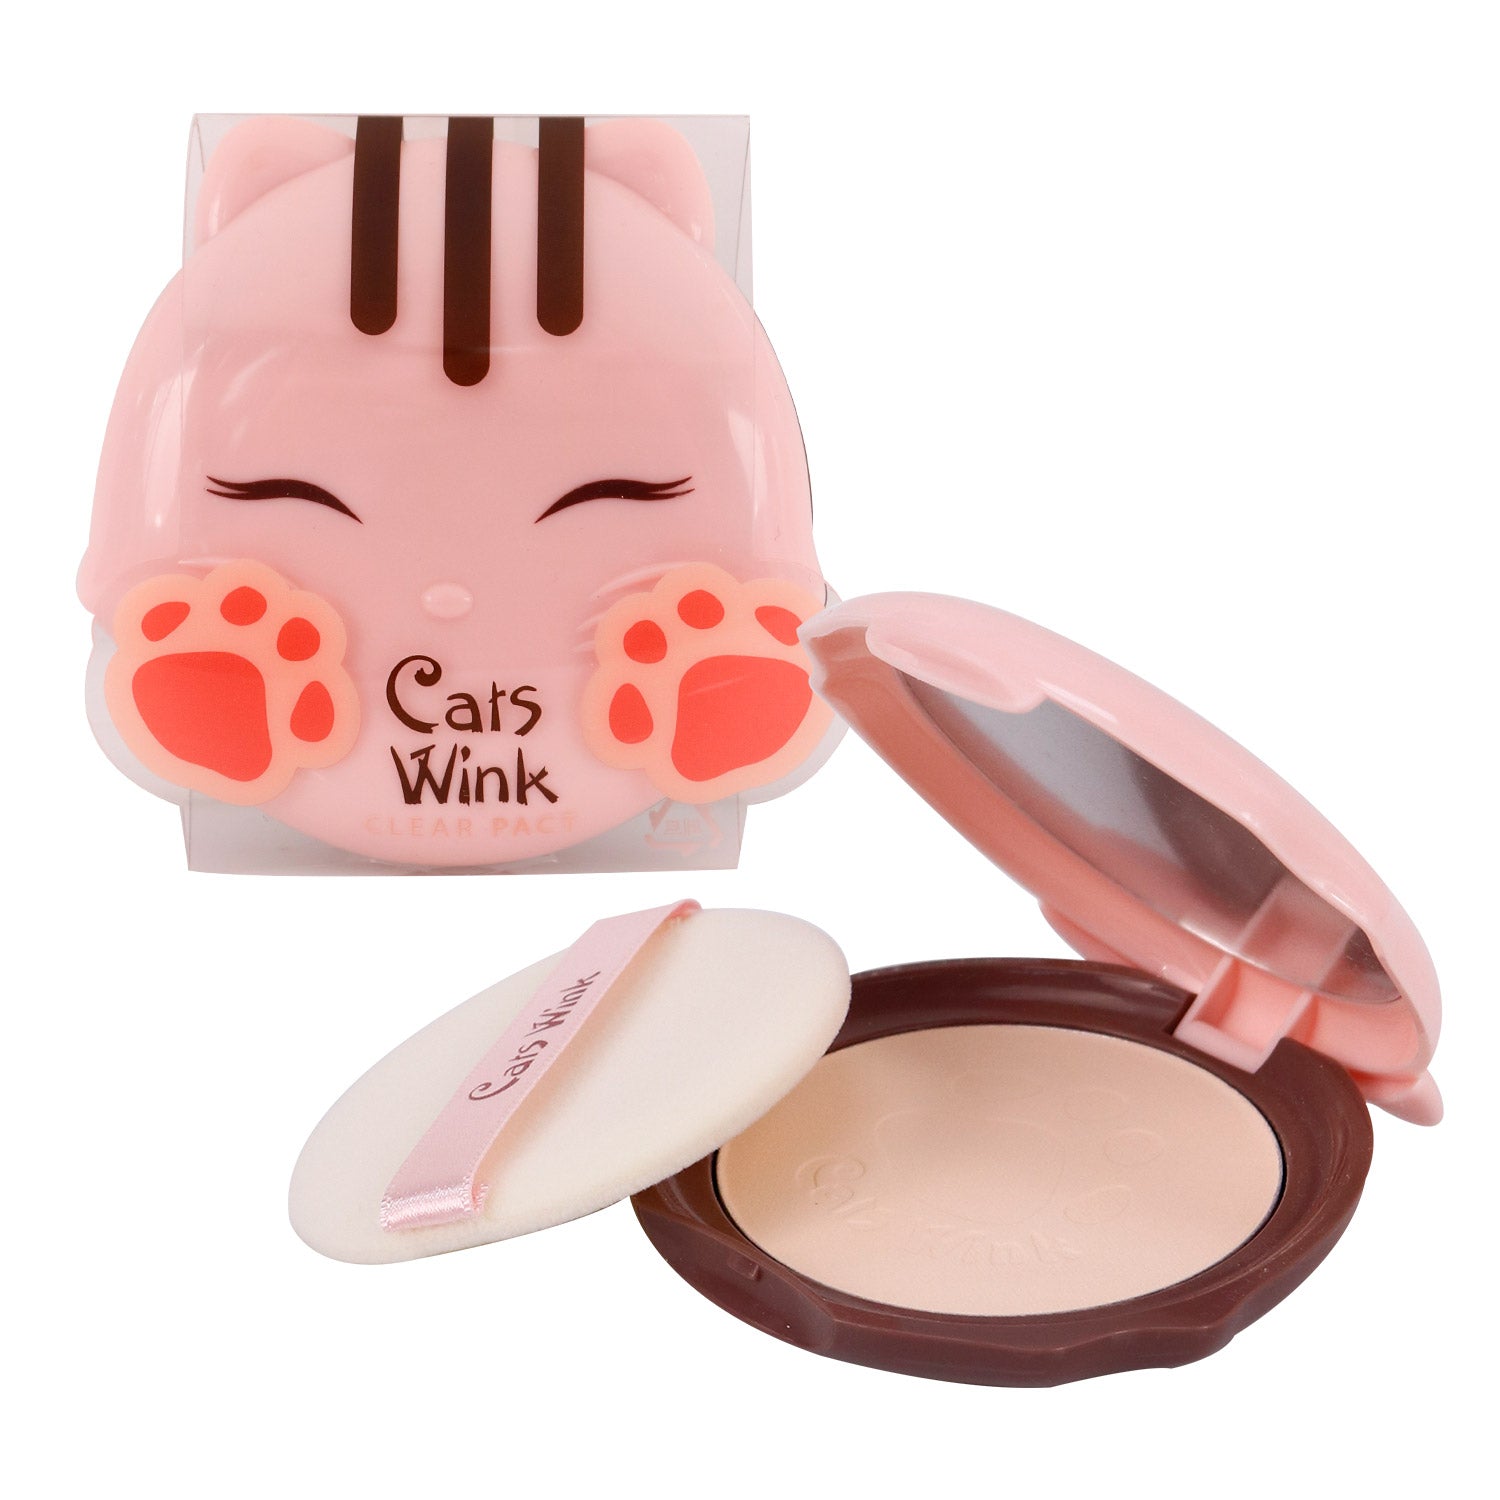 Cats Wink Clear Pact